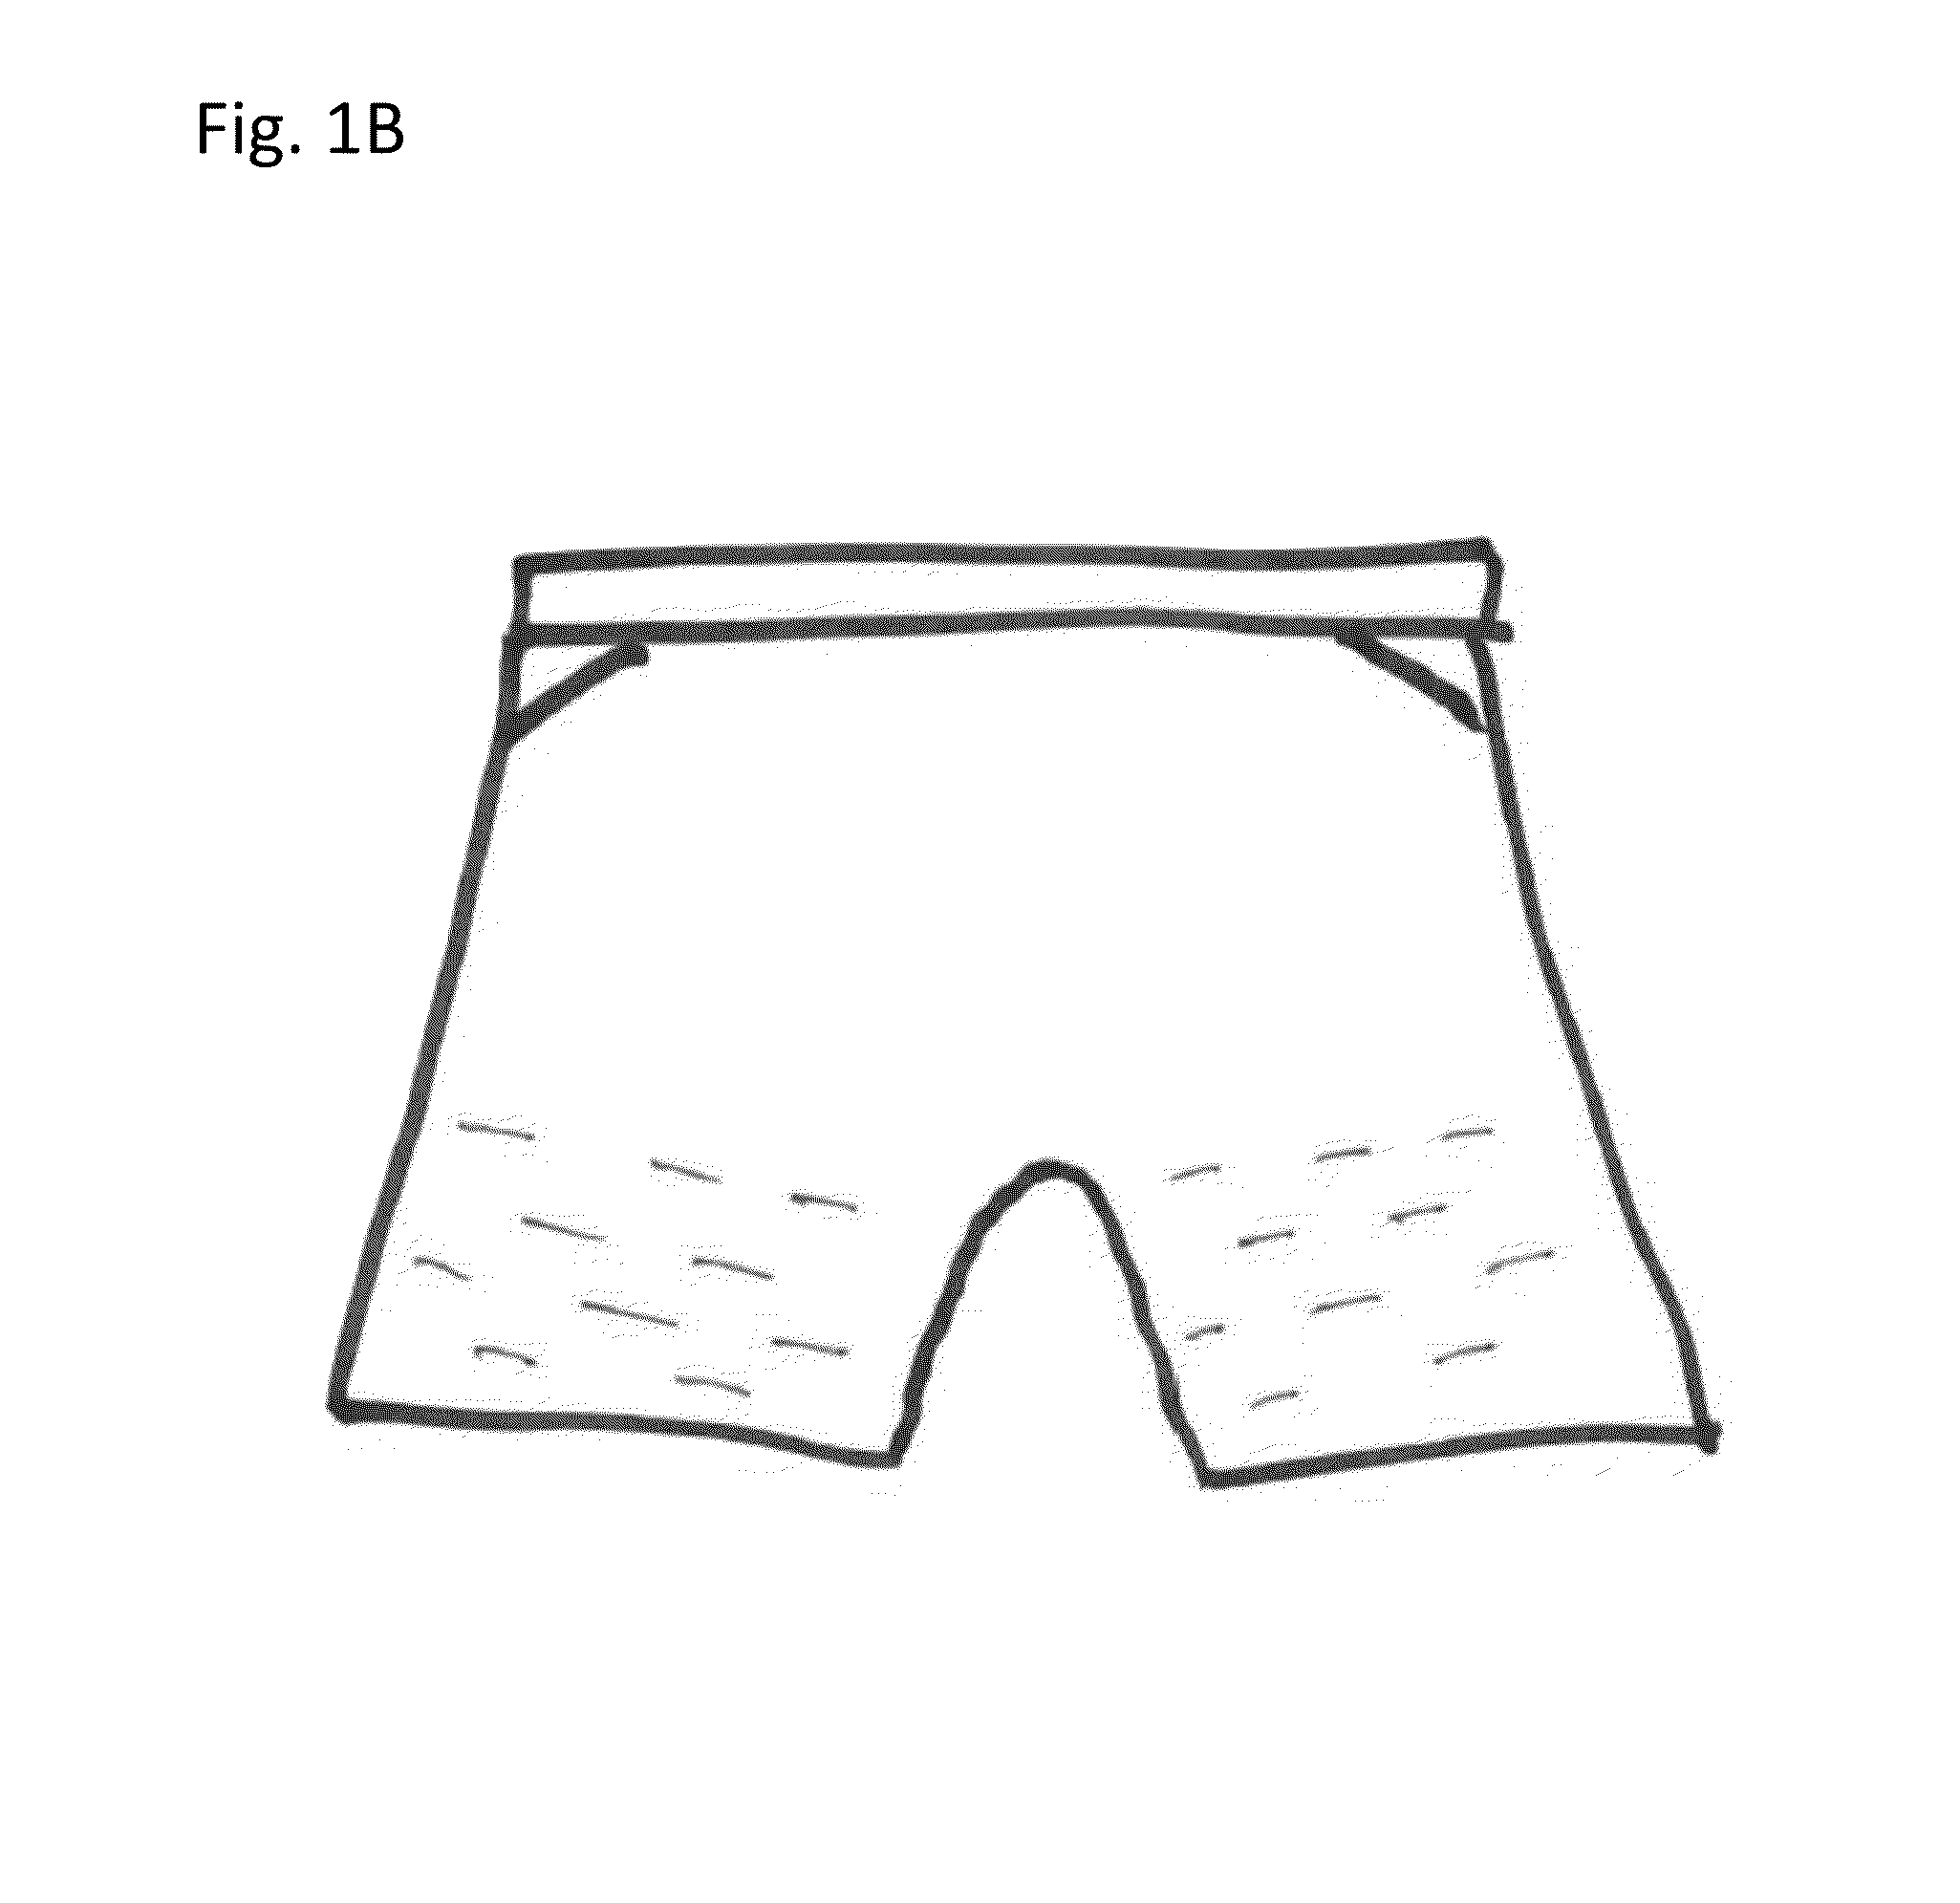 Systems and Methods for Isolating Distinct Anatomical Parts Without Support